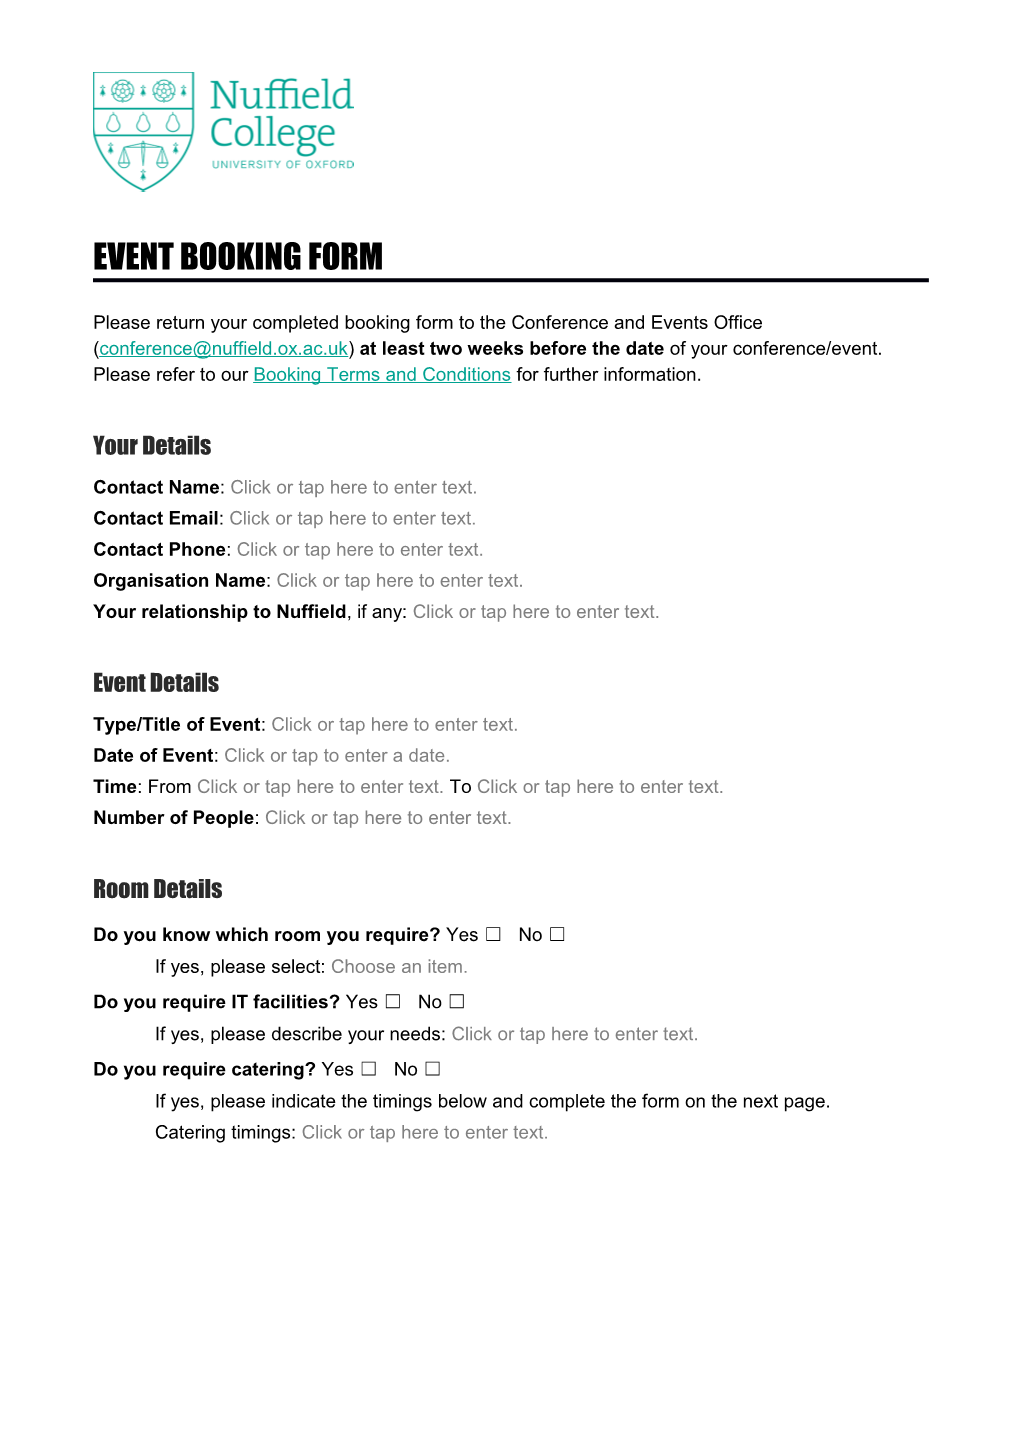 Event Booking Form (Continued)